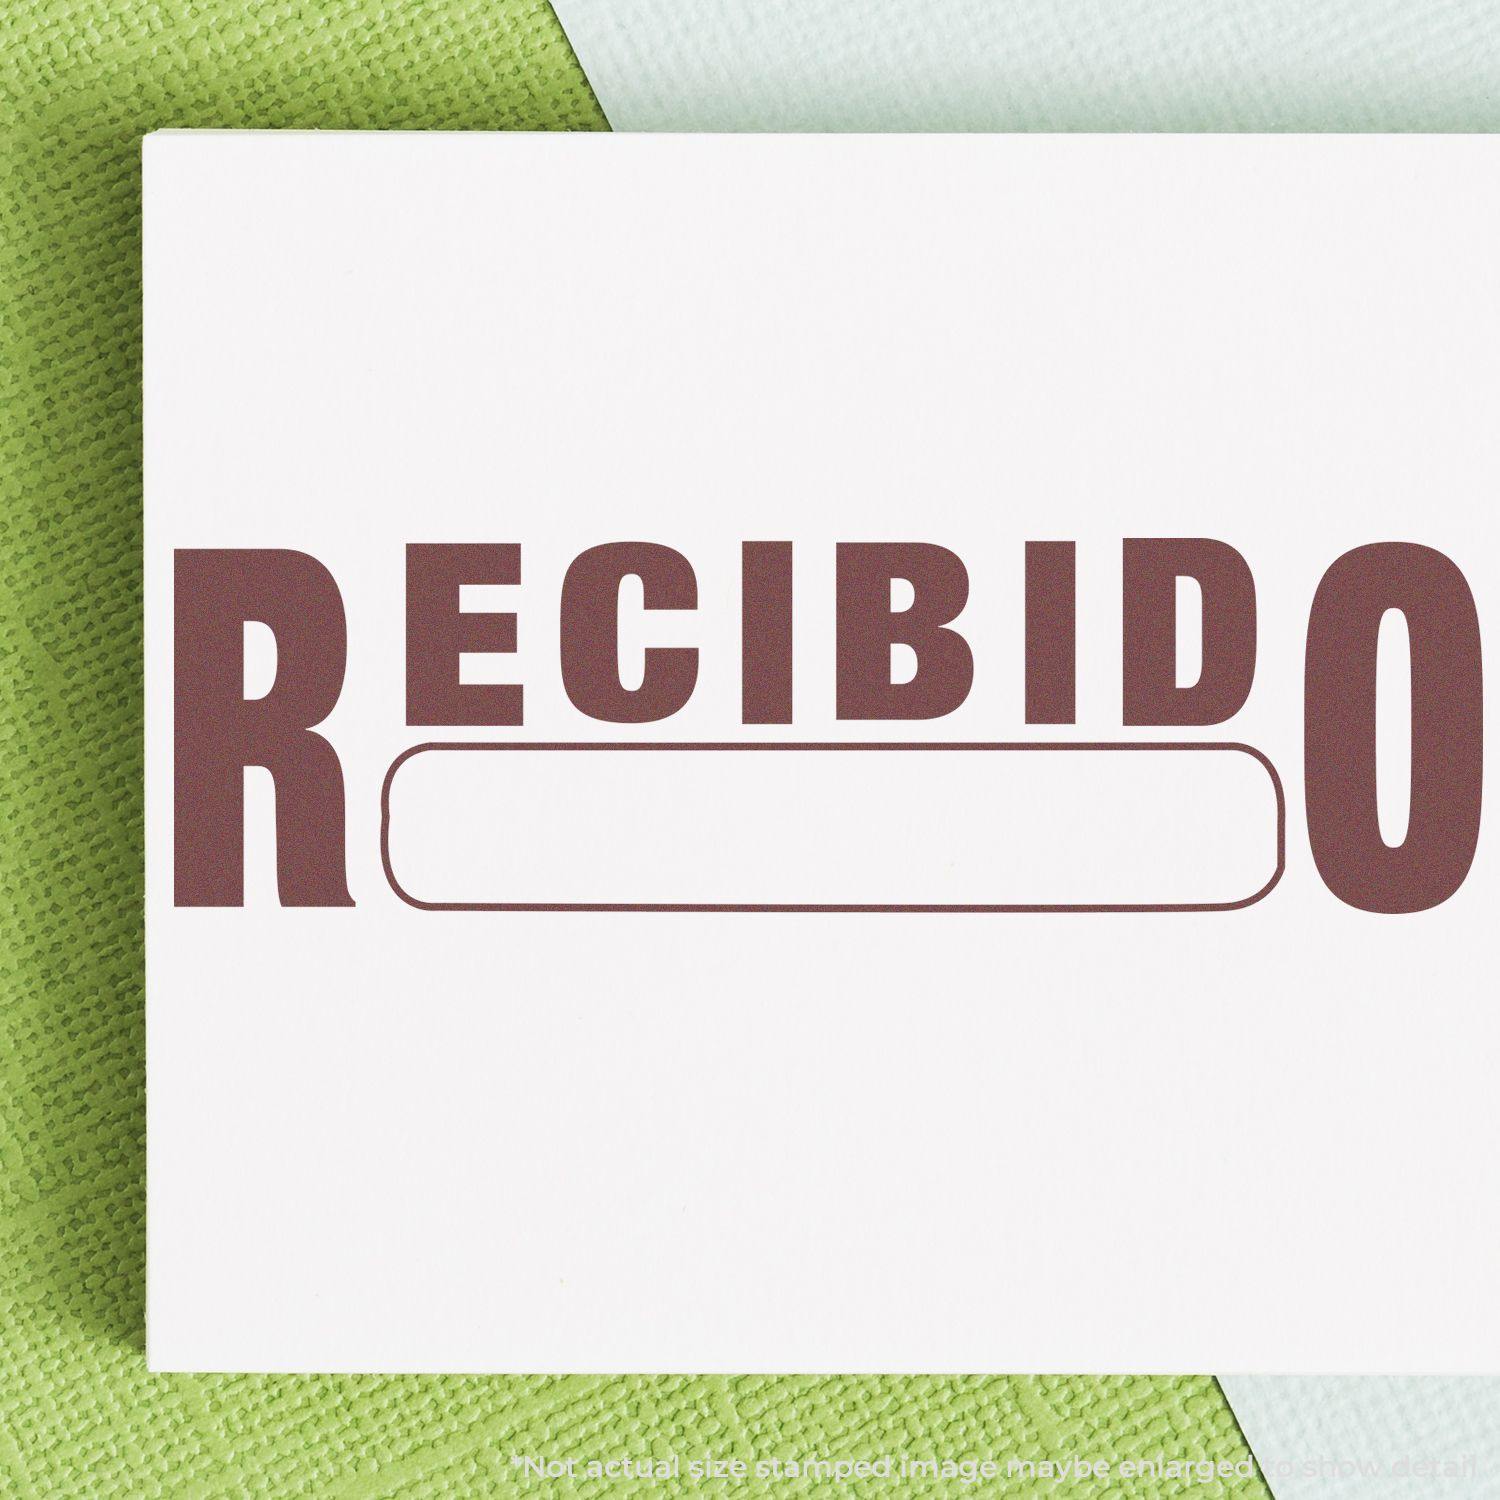 A stock office rubber stamp with a stamped image showing how the text "RECIBIDO" in a large font with a box is displayed after stamping.